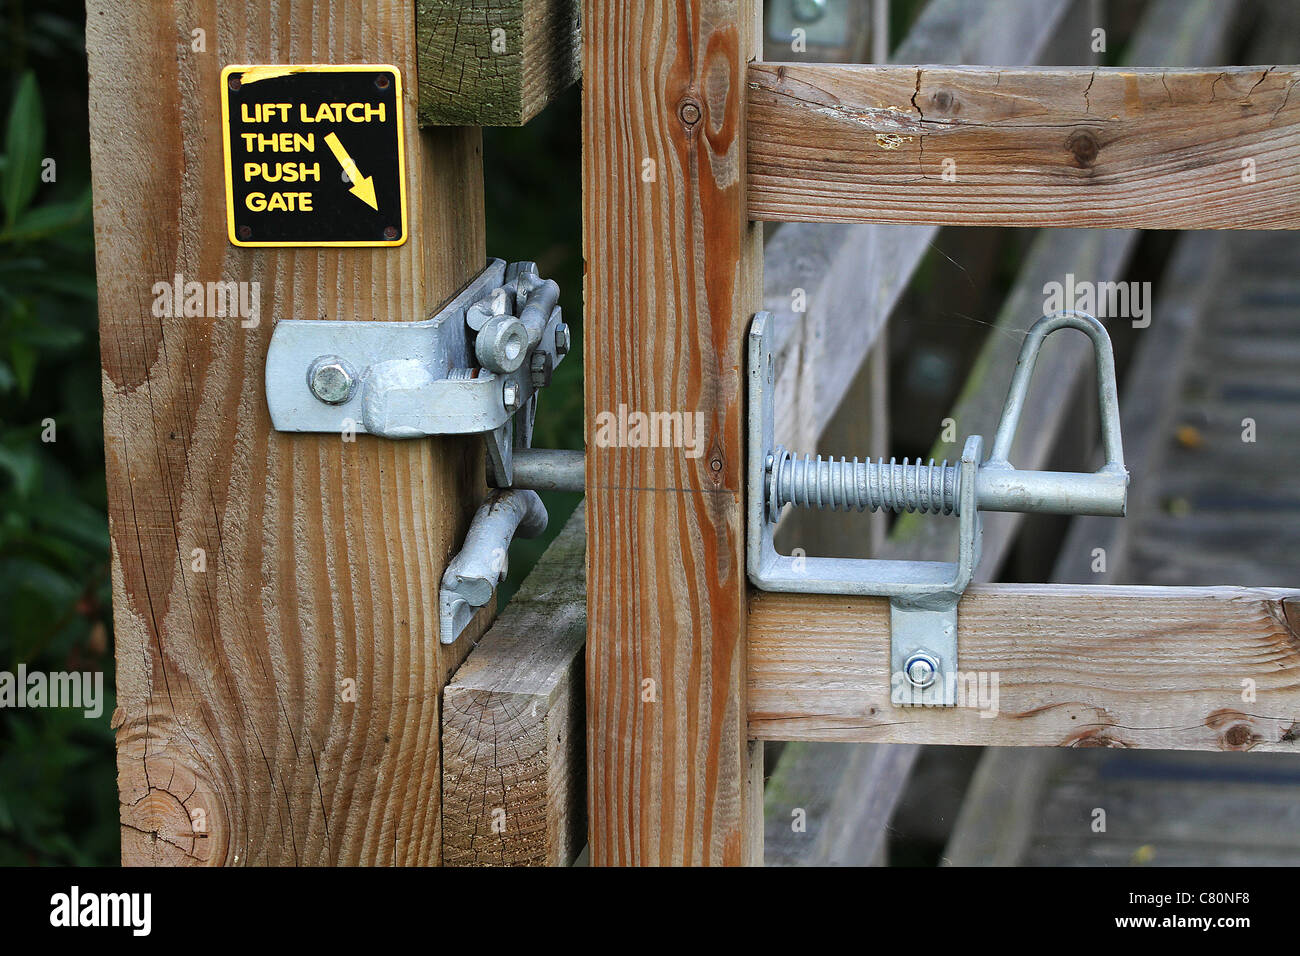 Modern galvanized gate bolts locks and catches. Stock Photo